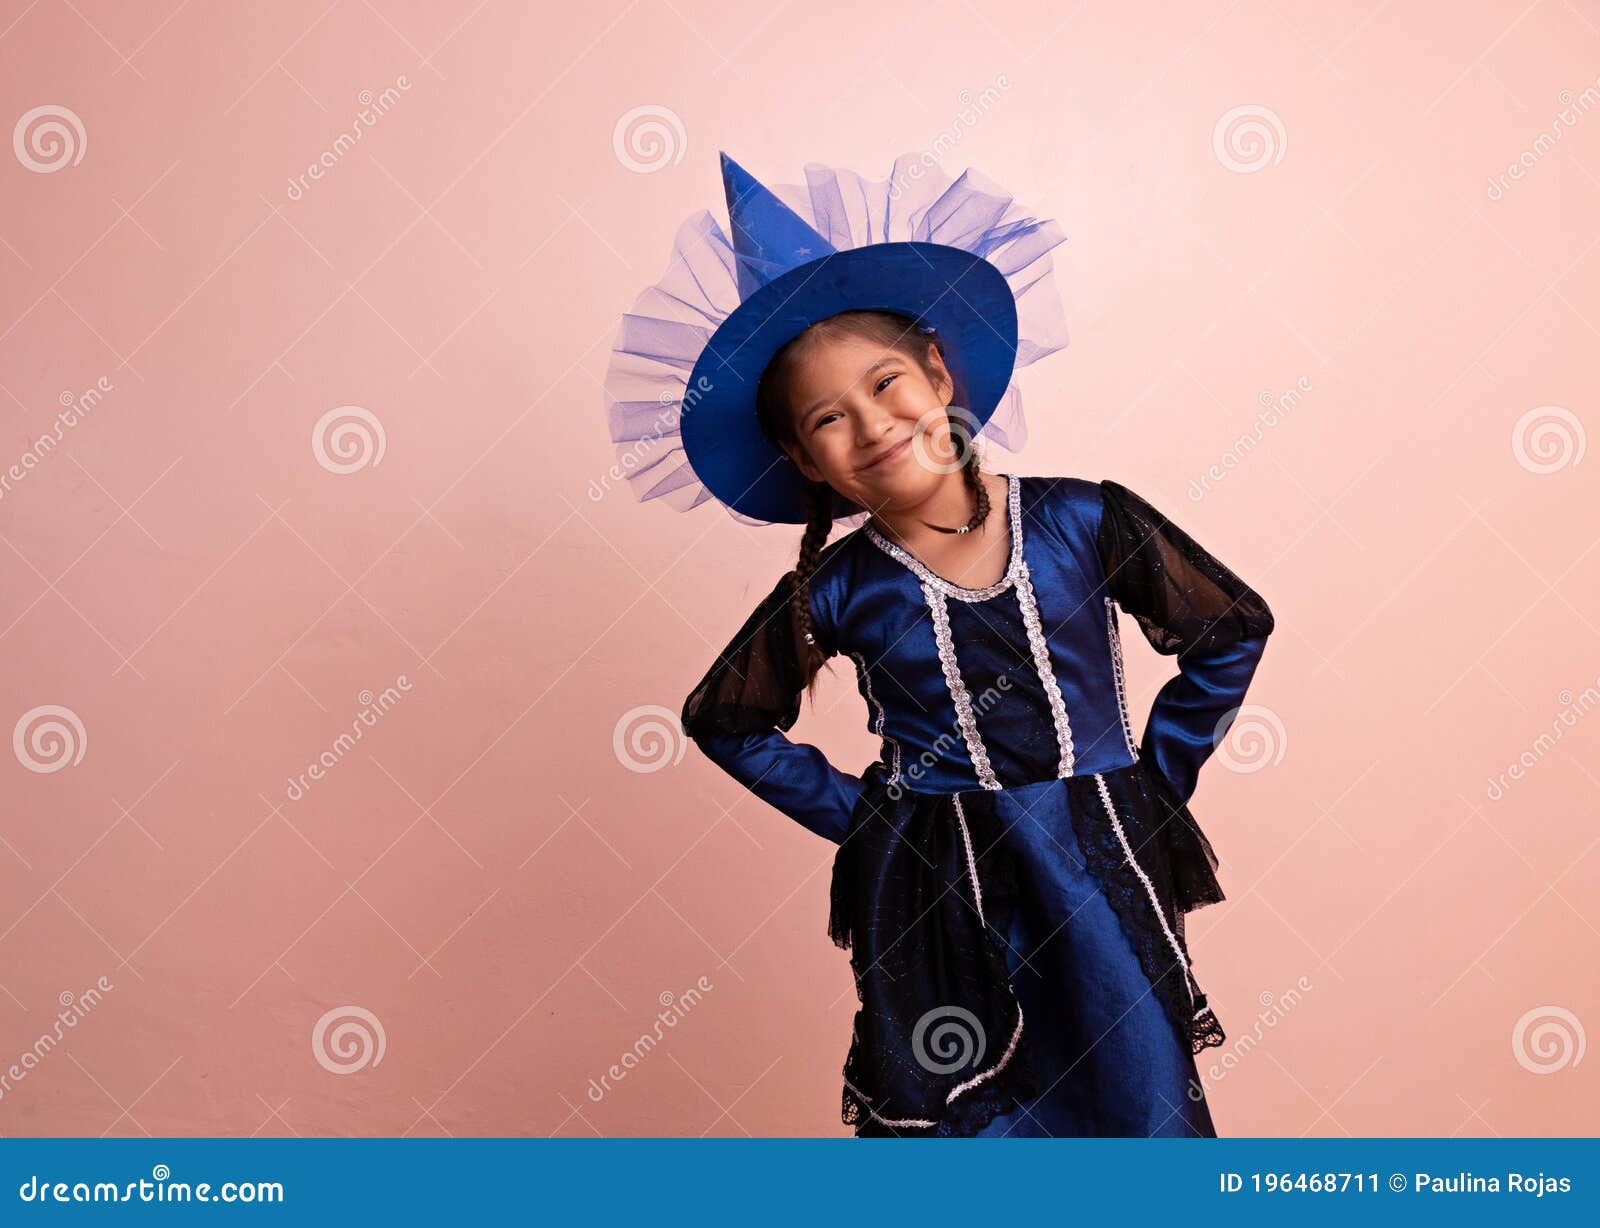 3. "Blue Haired Witch" Costume - wide 2